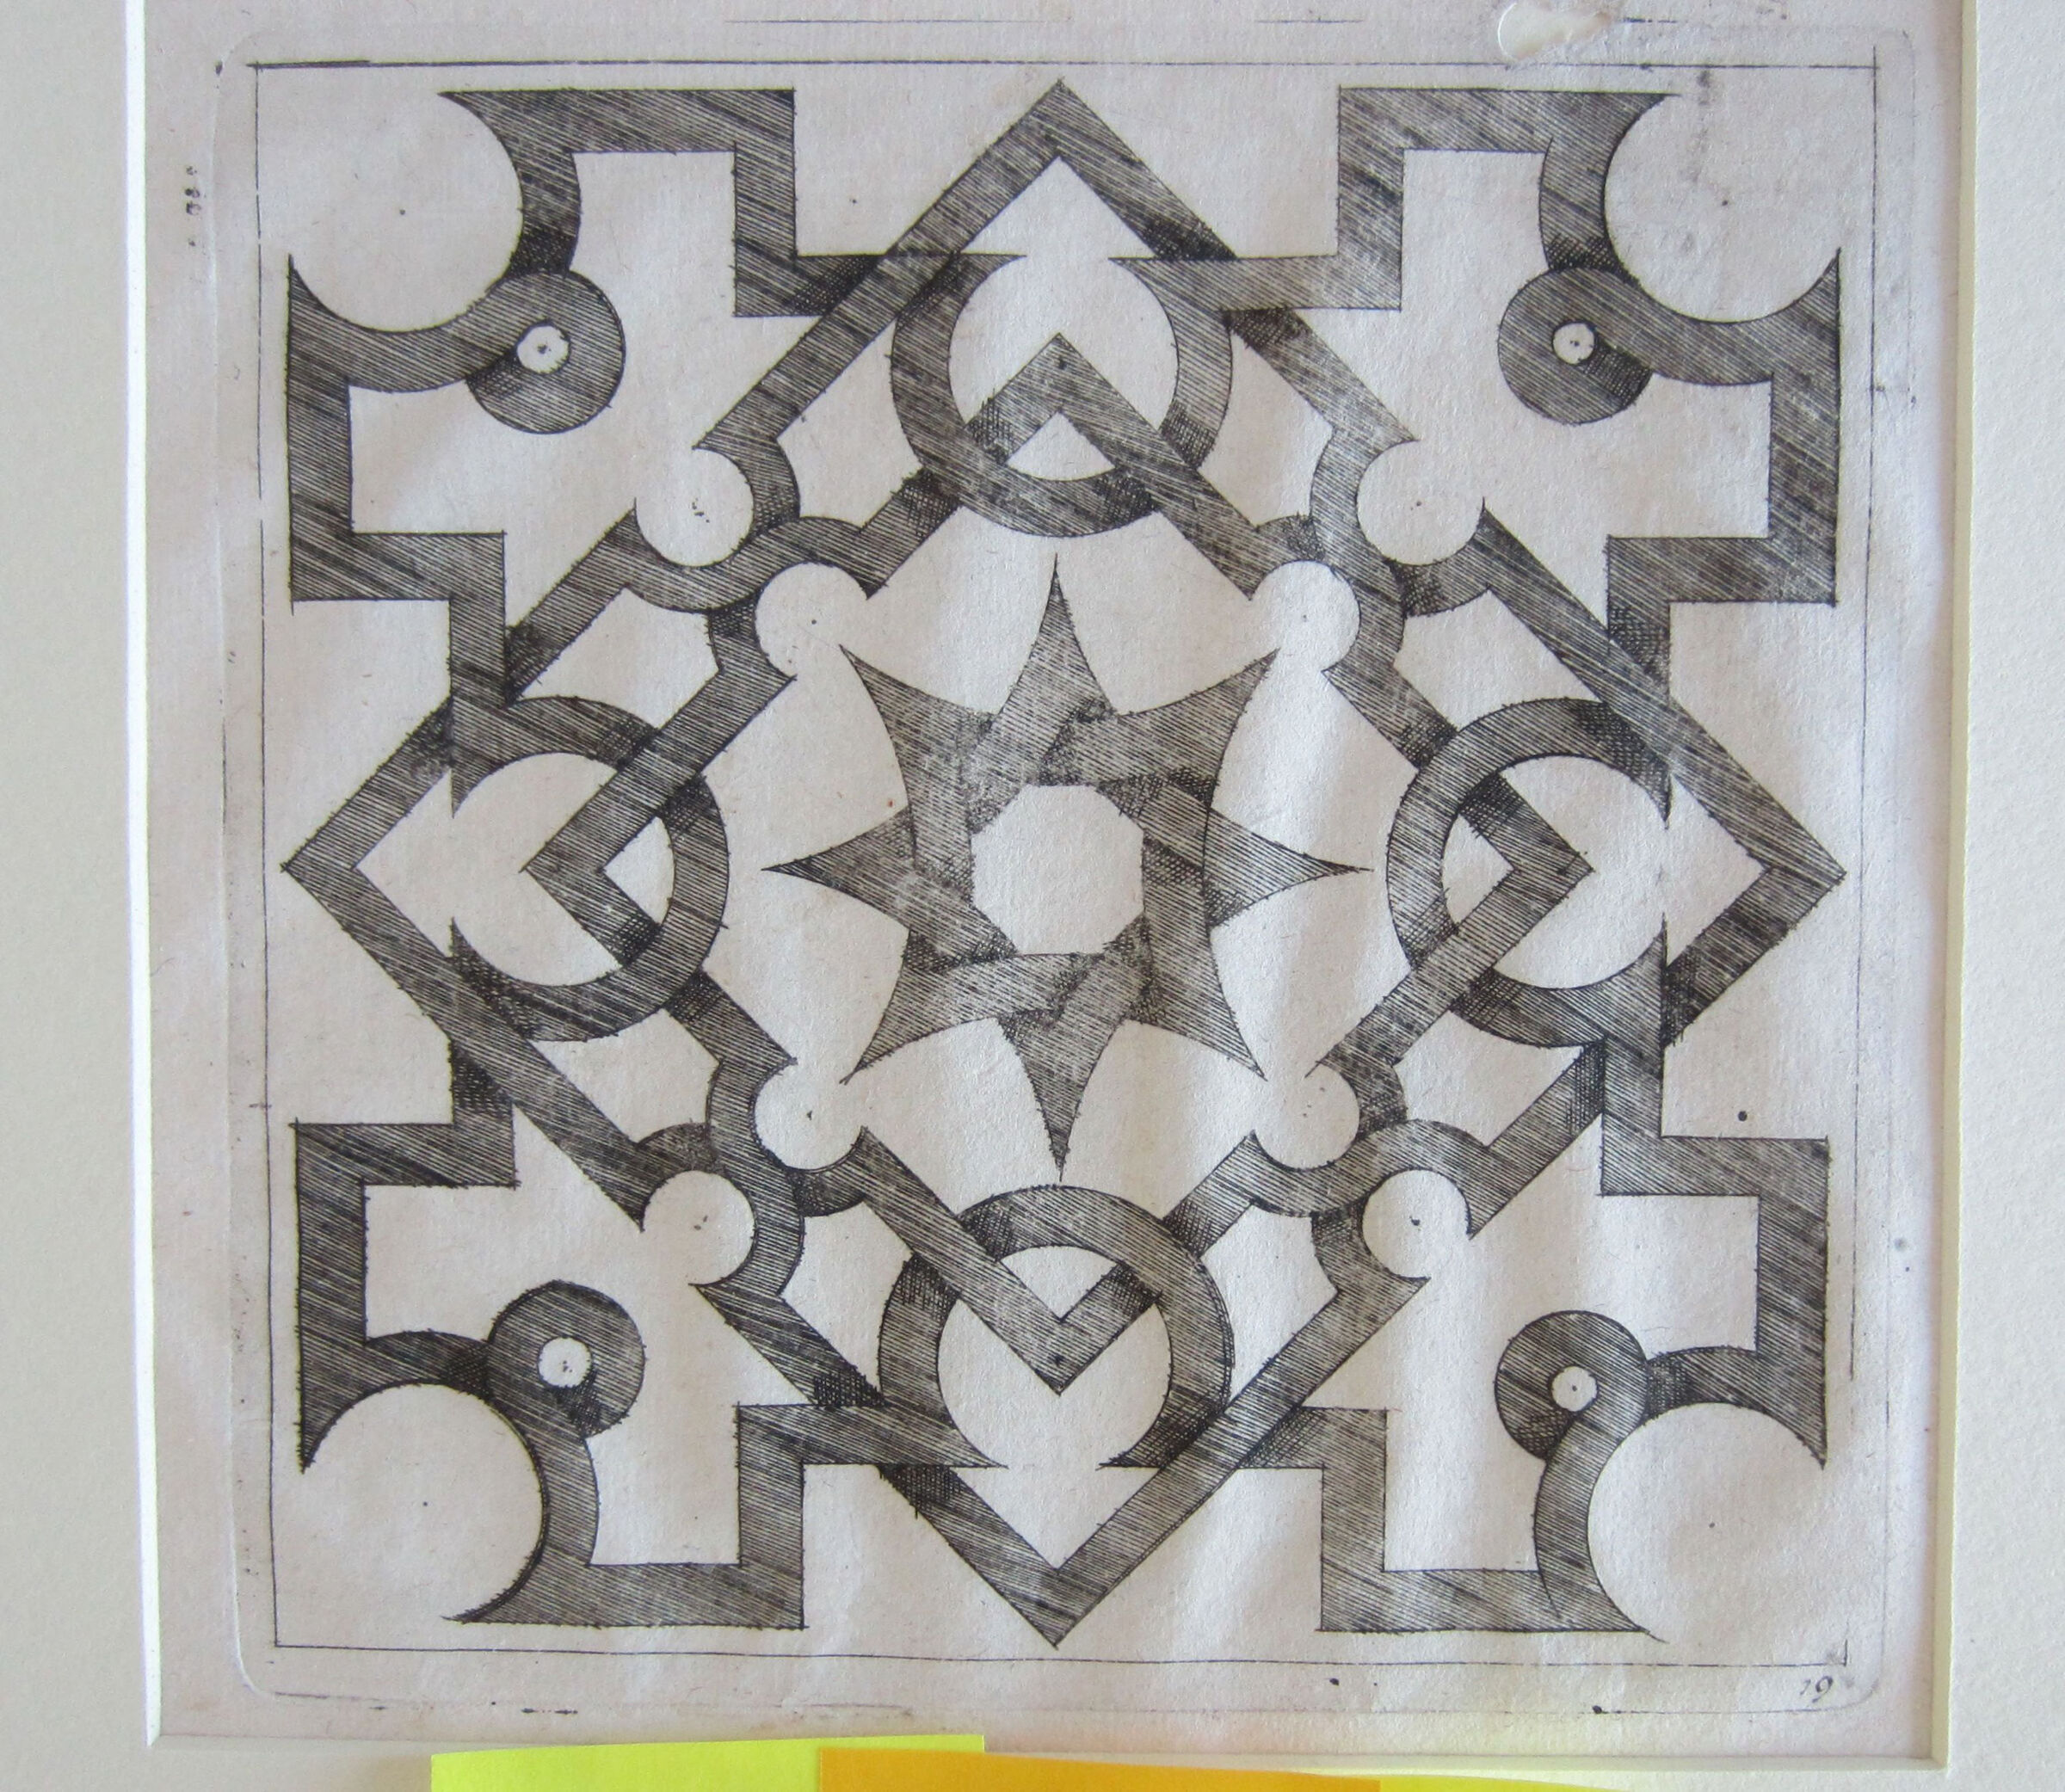 Interlace Centered By An Eight-Pointed Star With An Octagonal Center